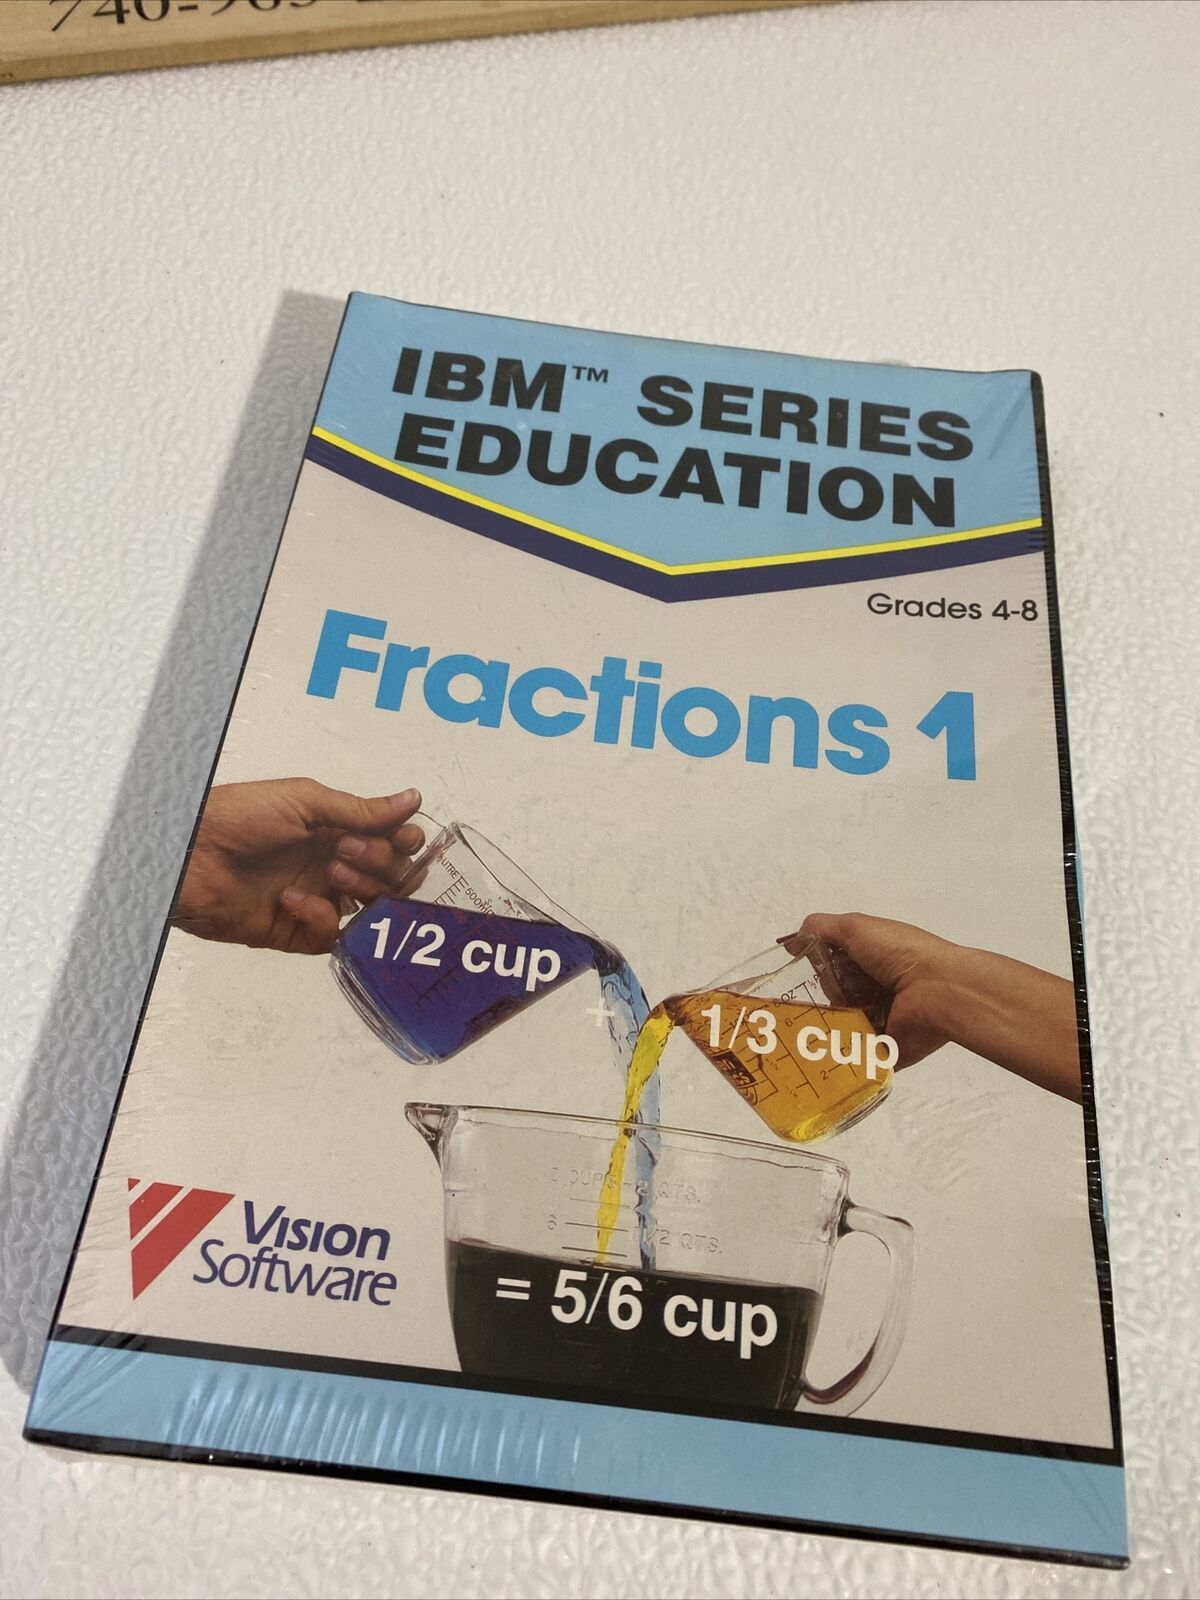 NEW SEALED Vintage 1993 IBM Series Education Fractions 1 Software